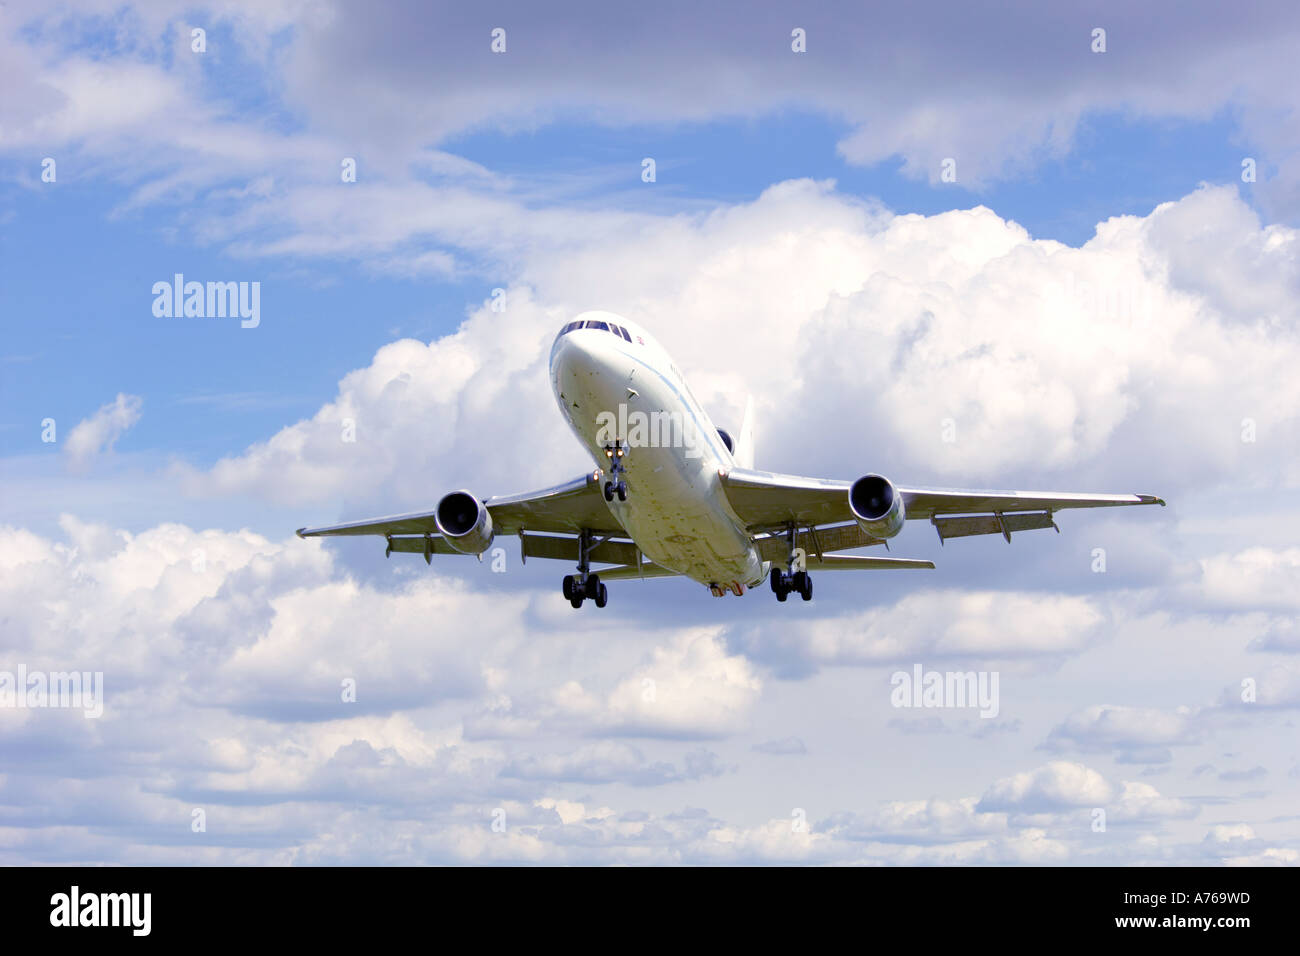 Close up view of a passenger jet landing at an airport with the flaps and landing gear down. Stock Photo